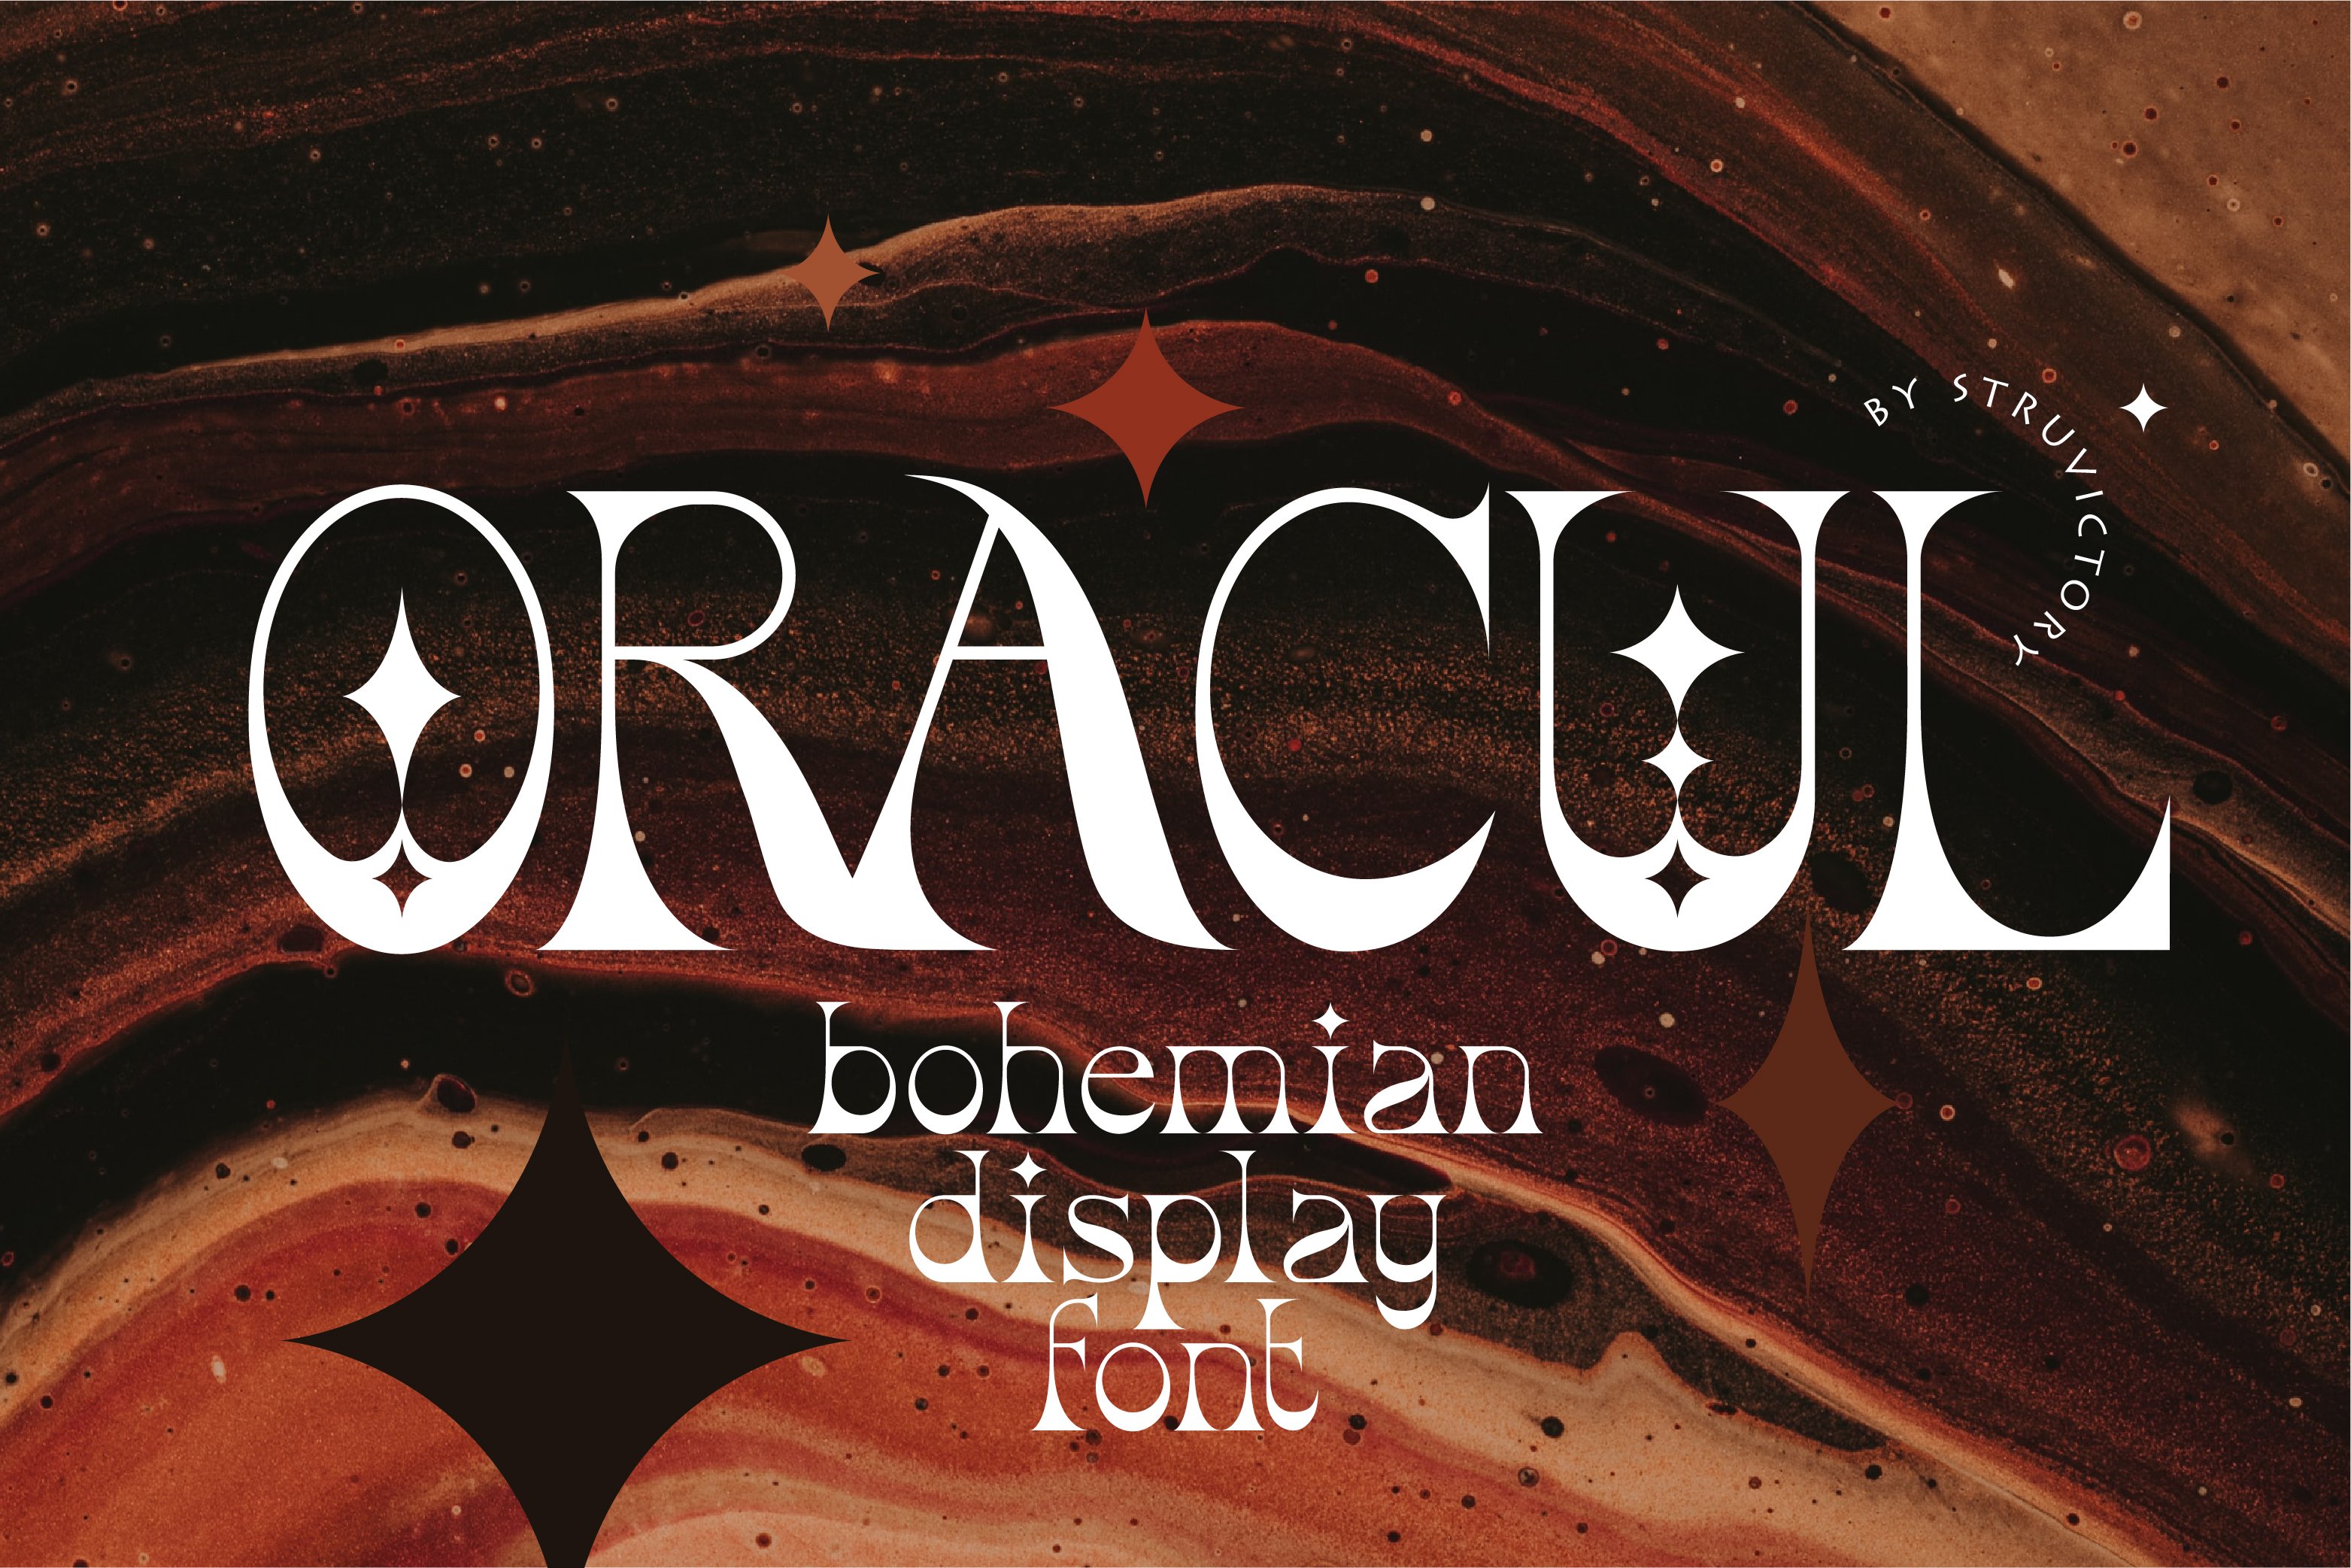 Oracul - Bohemian Display Font cover image.